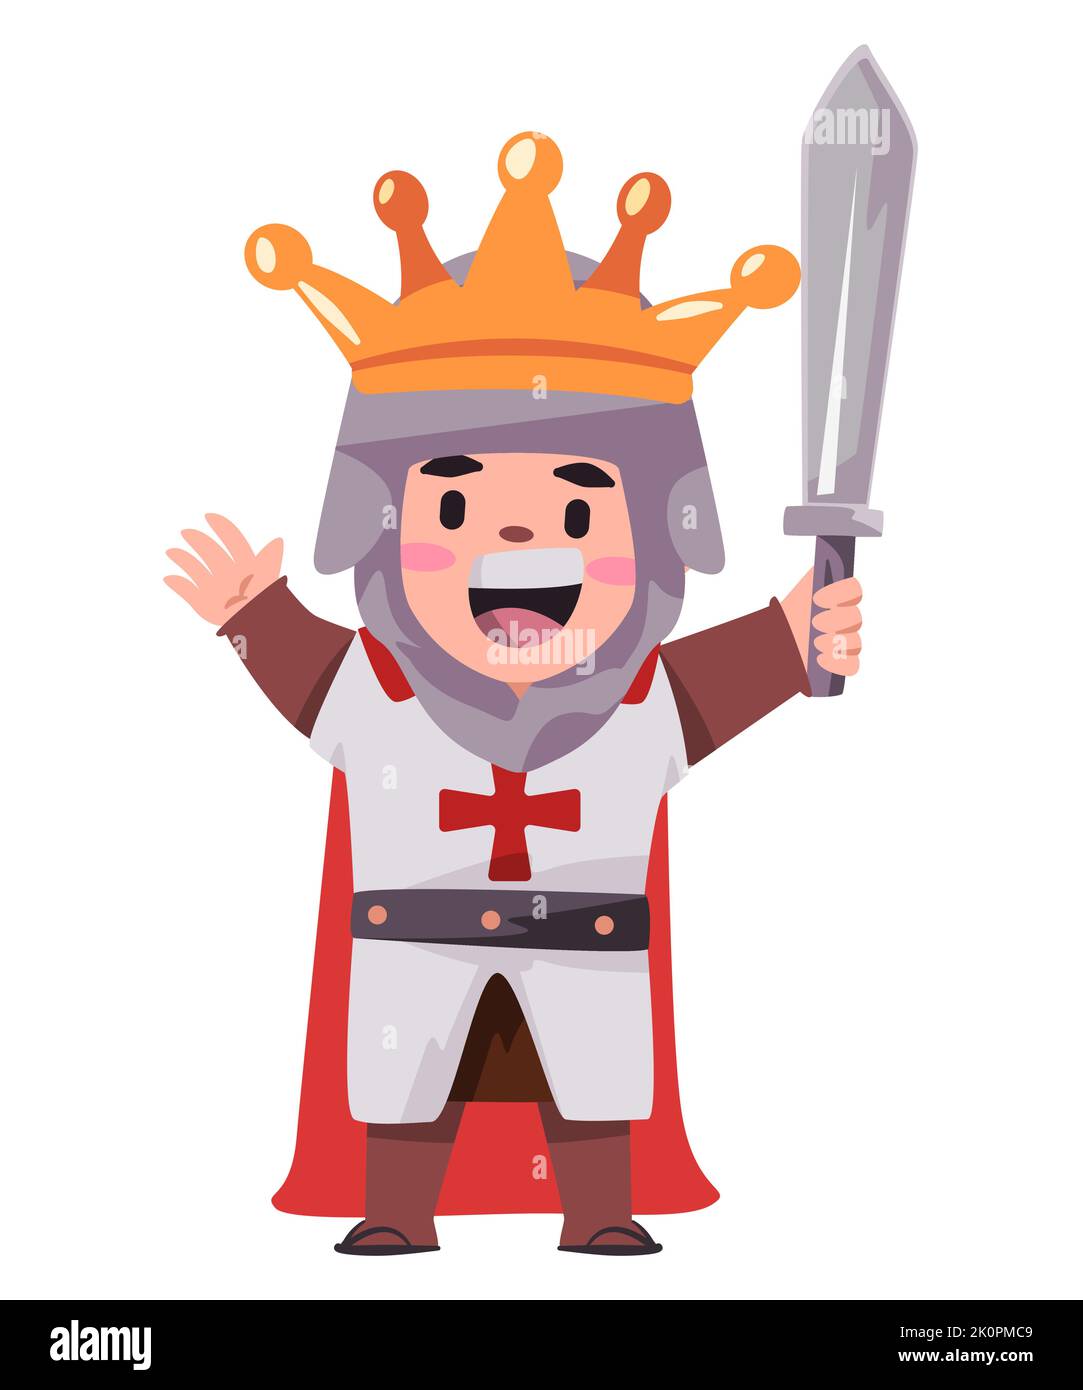 kids wearing knight armor with crown holding sword from medieval european ages Stock Vector